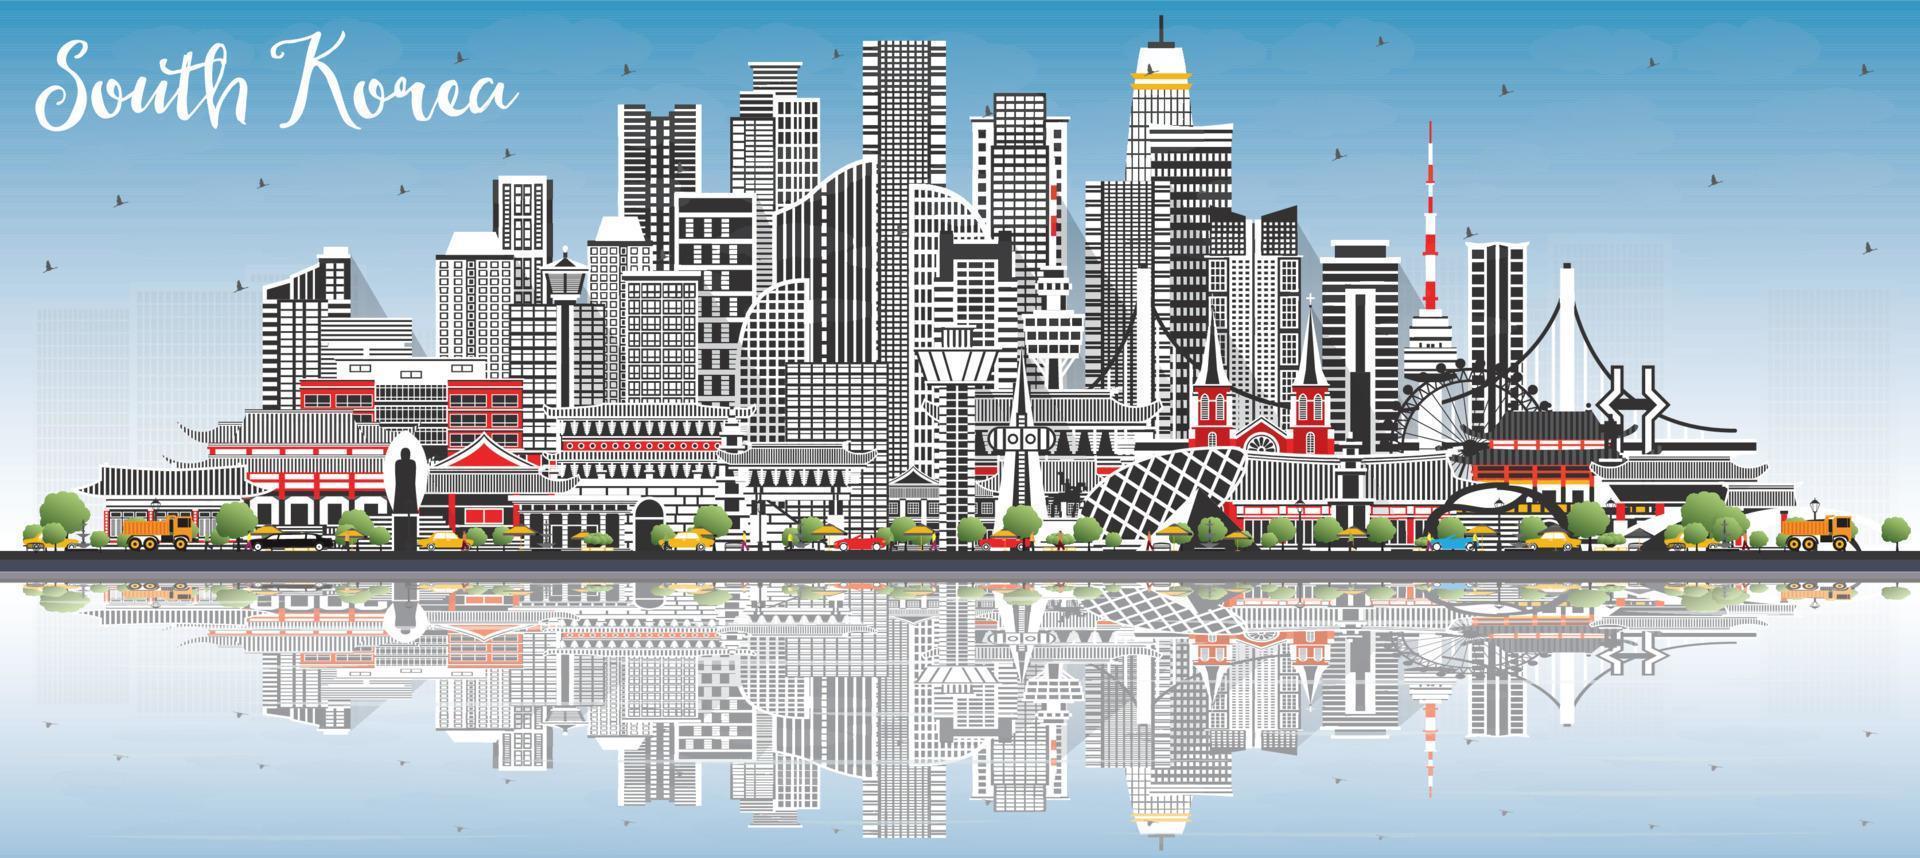 South Korea City Skyline with Gray Buildings, Blue Sky and Reflections. vector